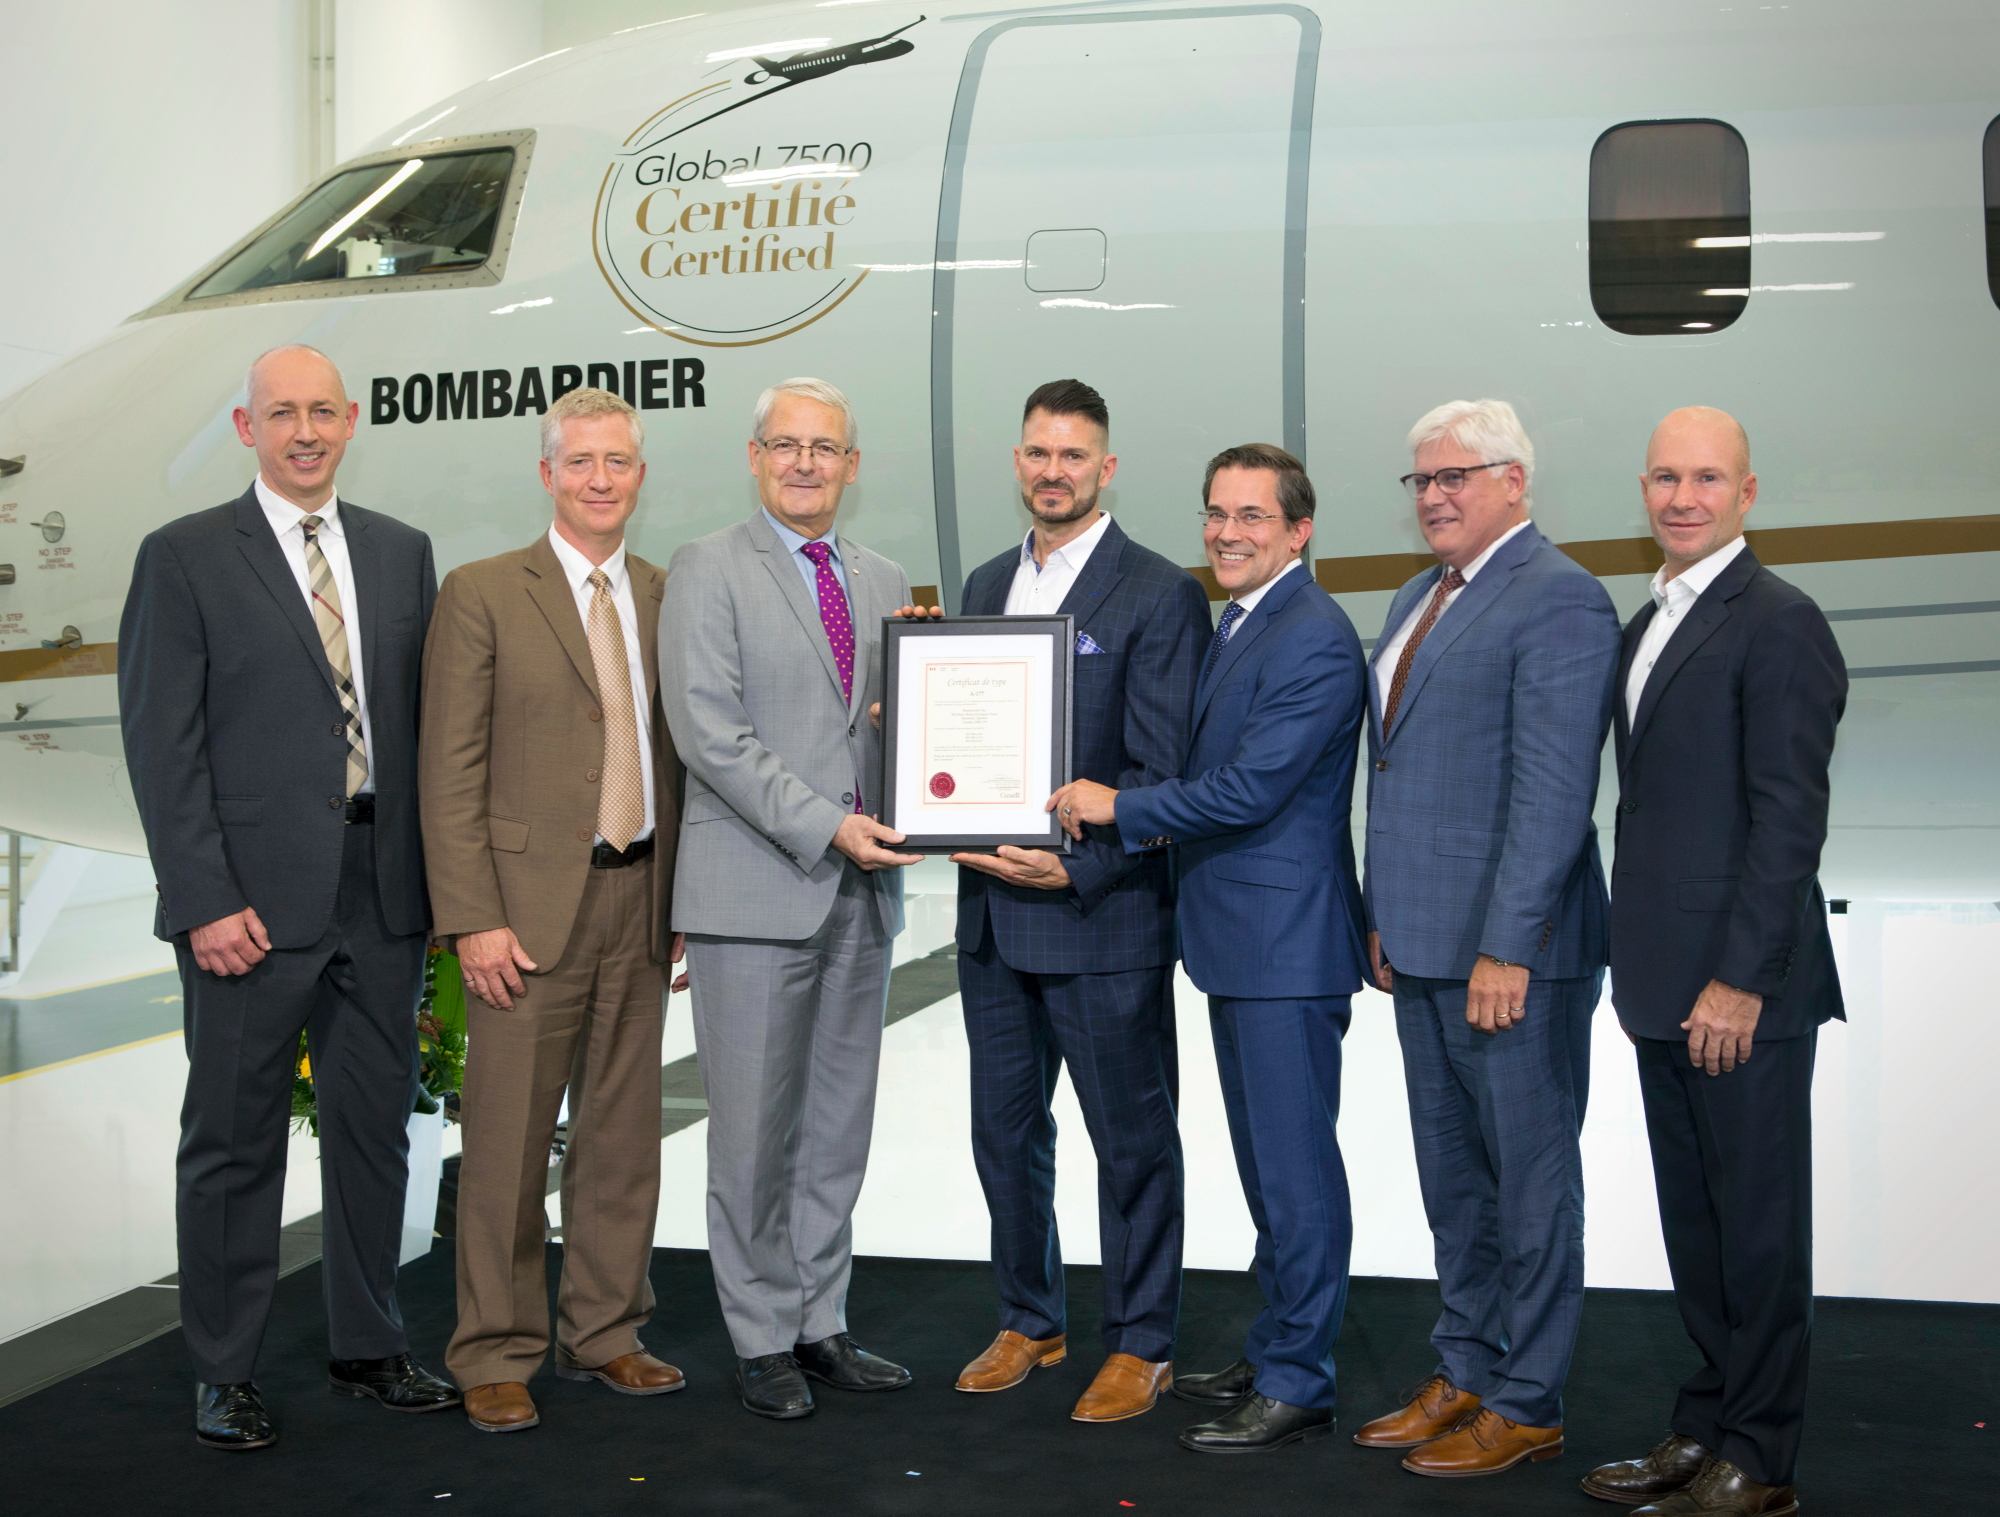 Bombardier's flagship Global 7500 aircraft has been awarded Transport Canada Type Certification, paving the way for entry-into-service this year. Certification by the Federal Aviation Administration (FAA) and the European Aviation Safety Agency (EASA) is expected to follow shortly. Click to enlarge.